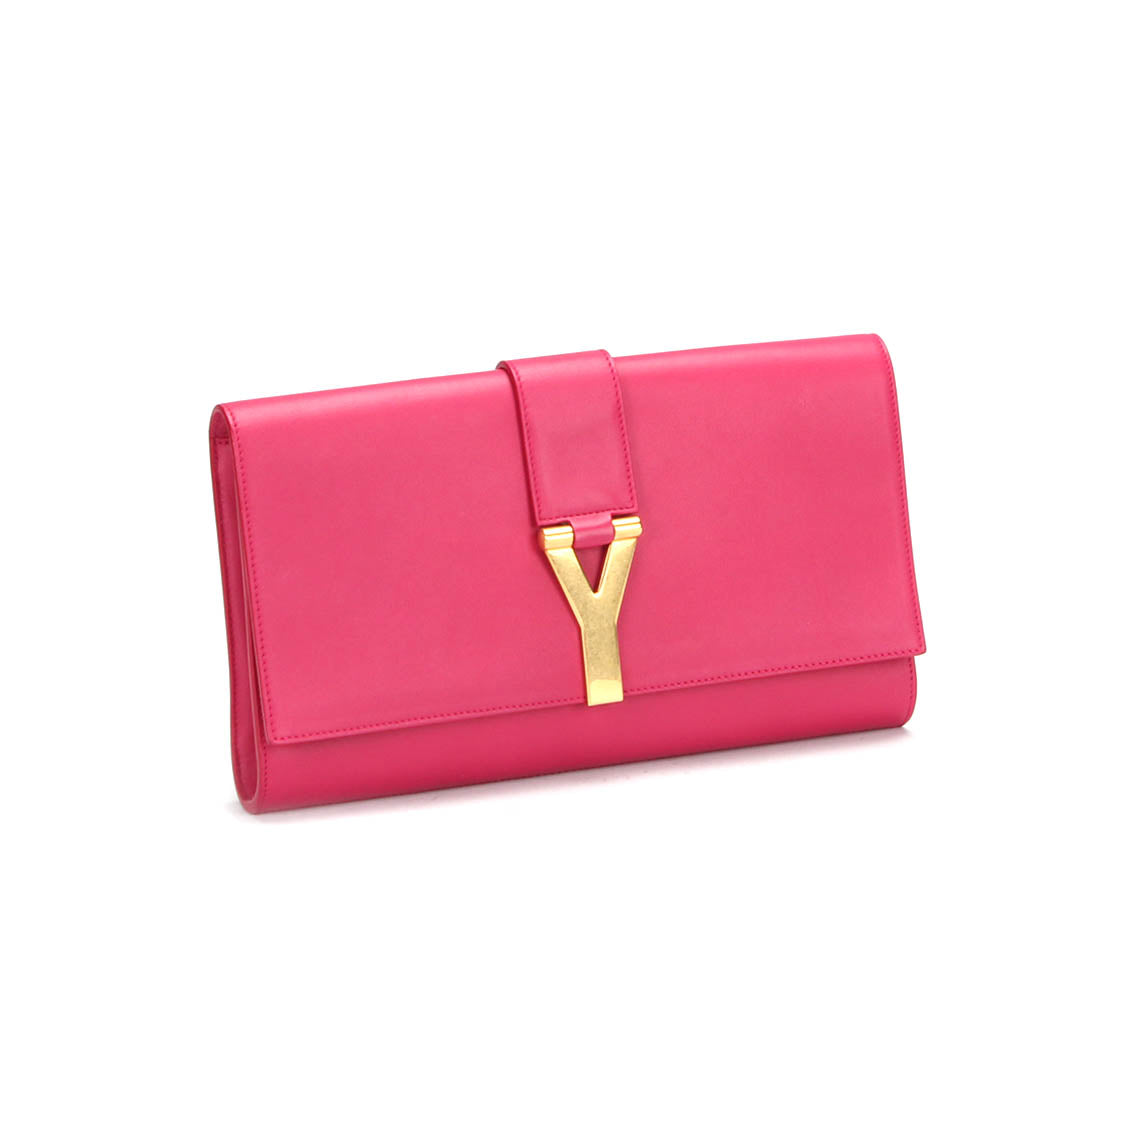 Cabas Chyc Leather Clutch Bag 311213